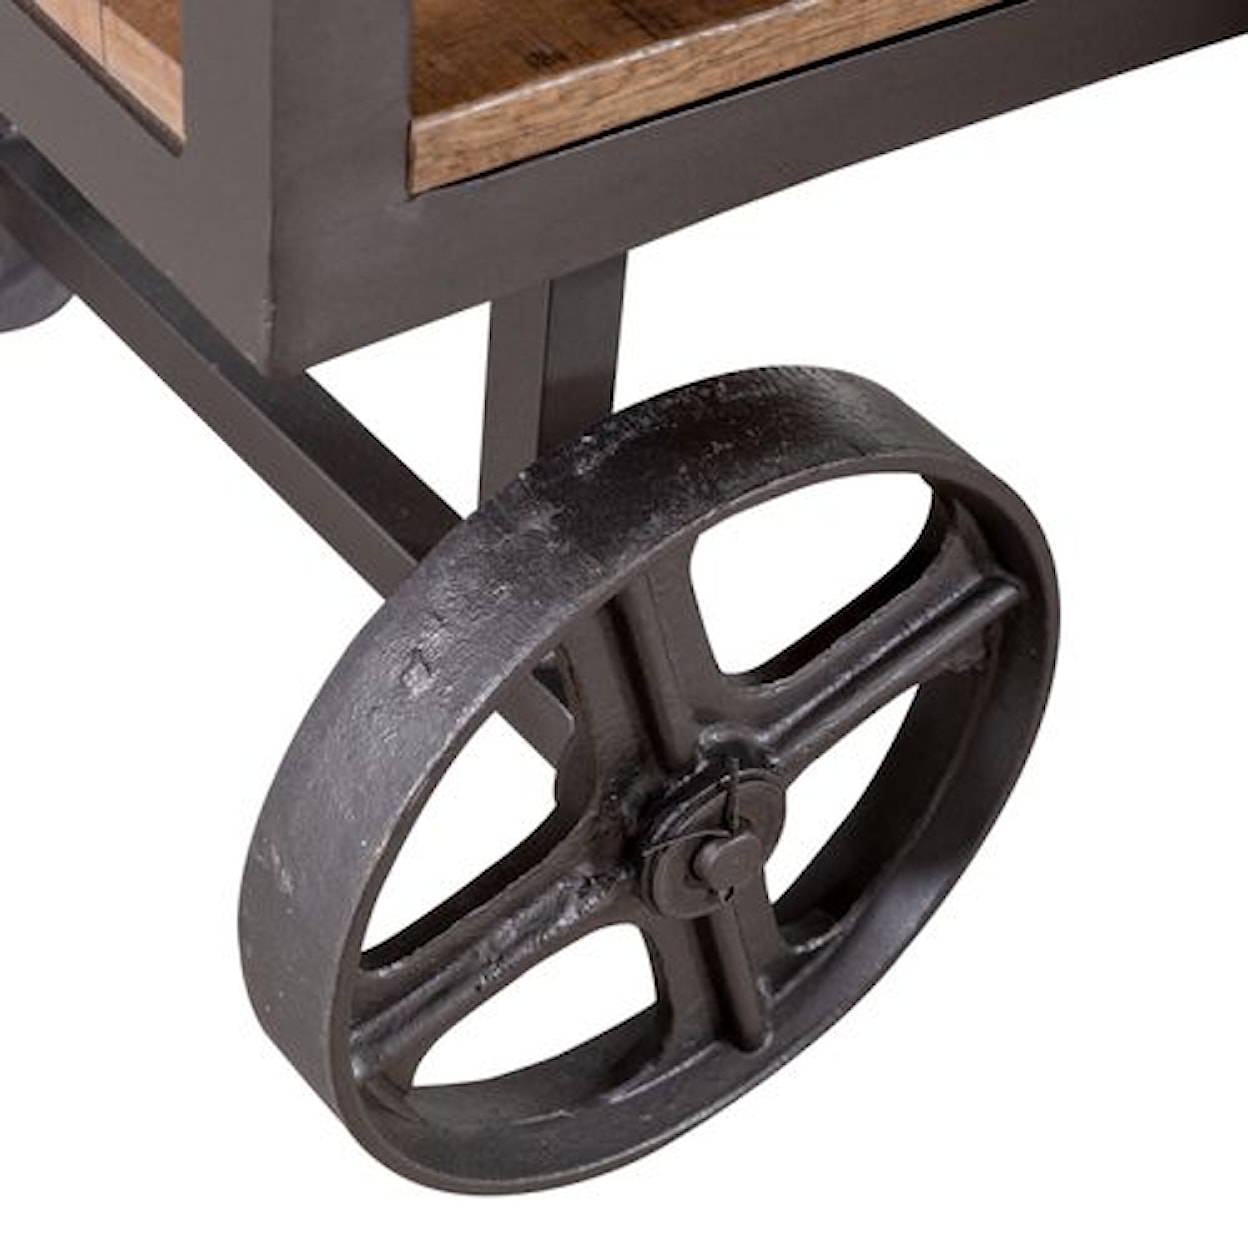 Liberty Furniture Farmers Market Accent Trolley